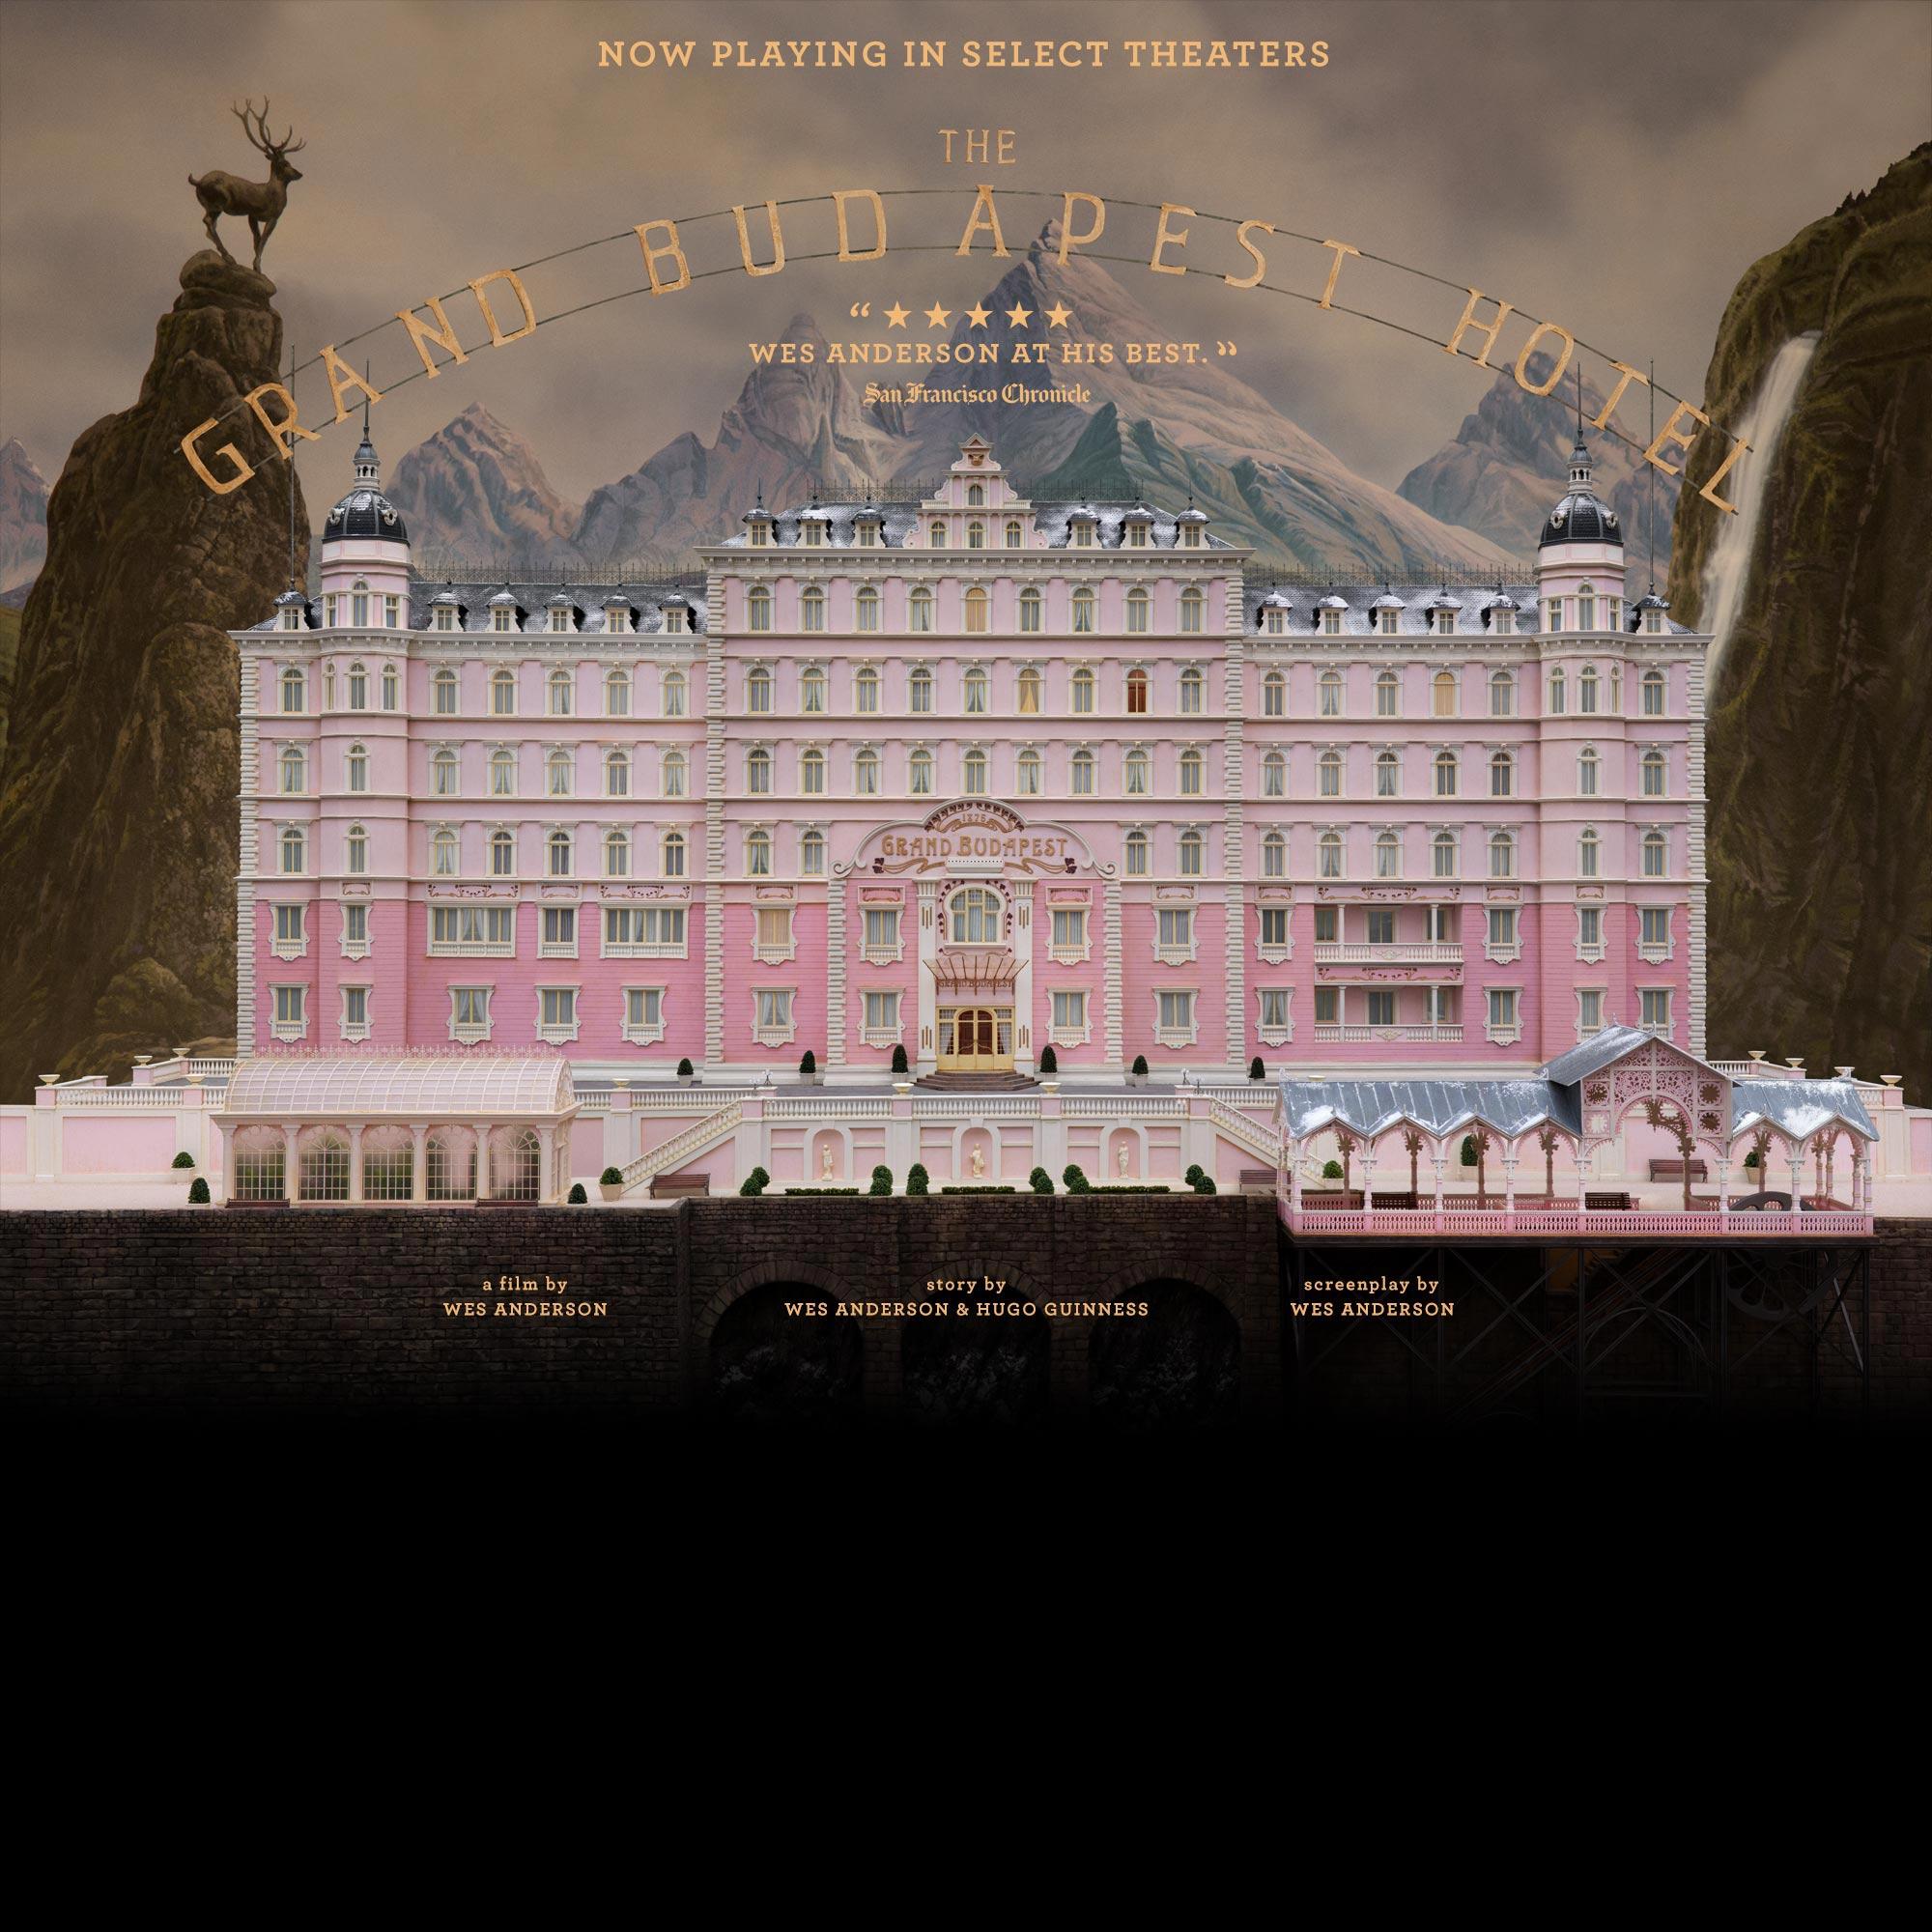 Film Review: Wes Anderson's 'The Grand Budapest Hotel' Is Superb